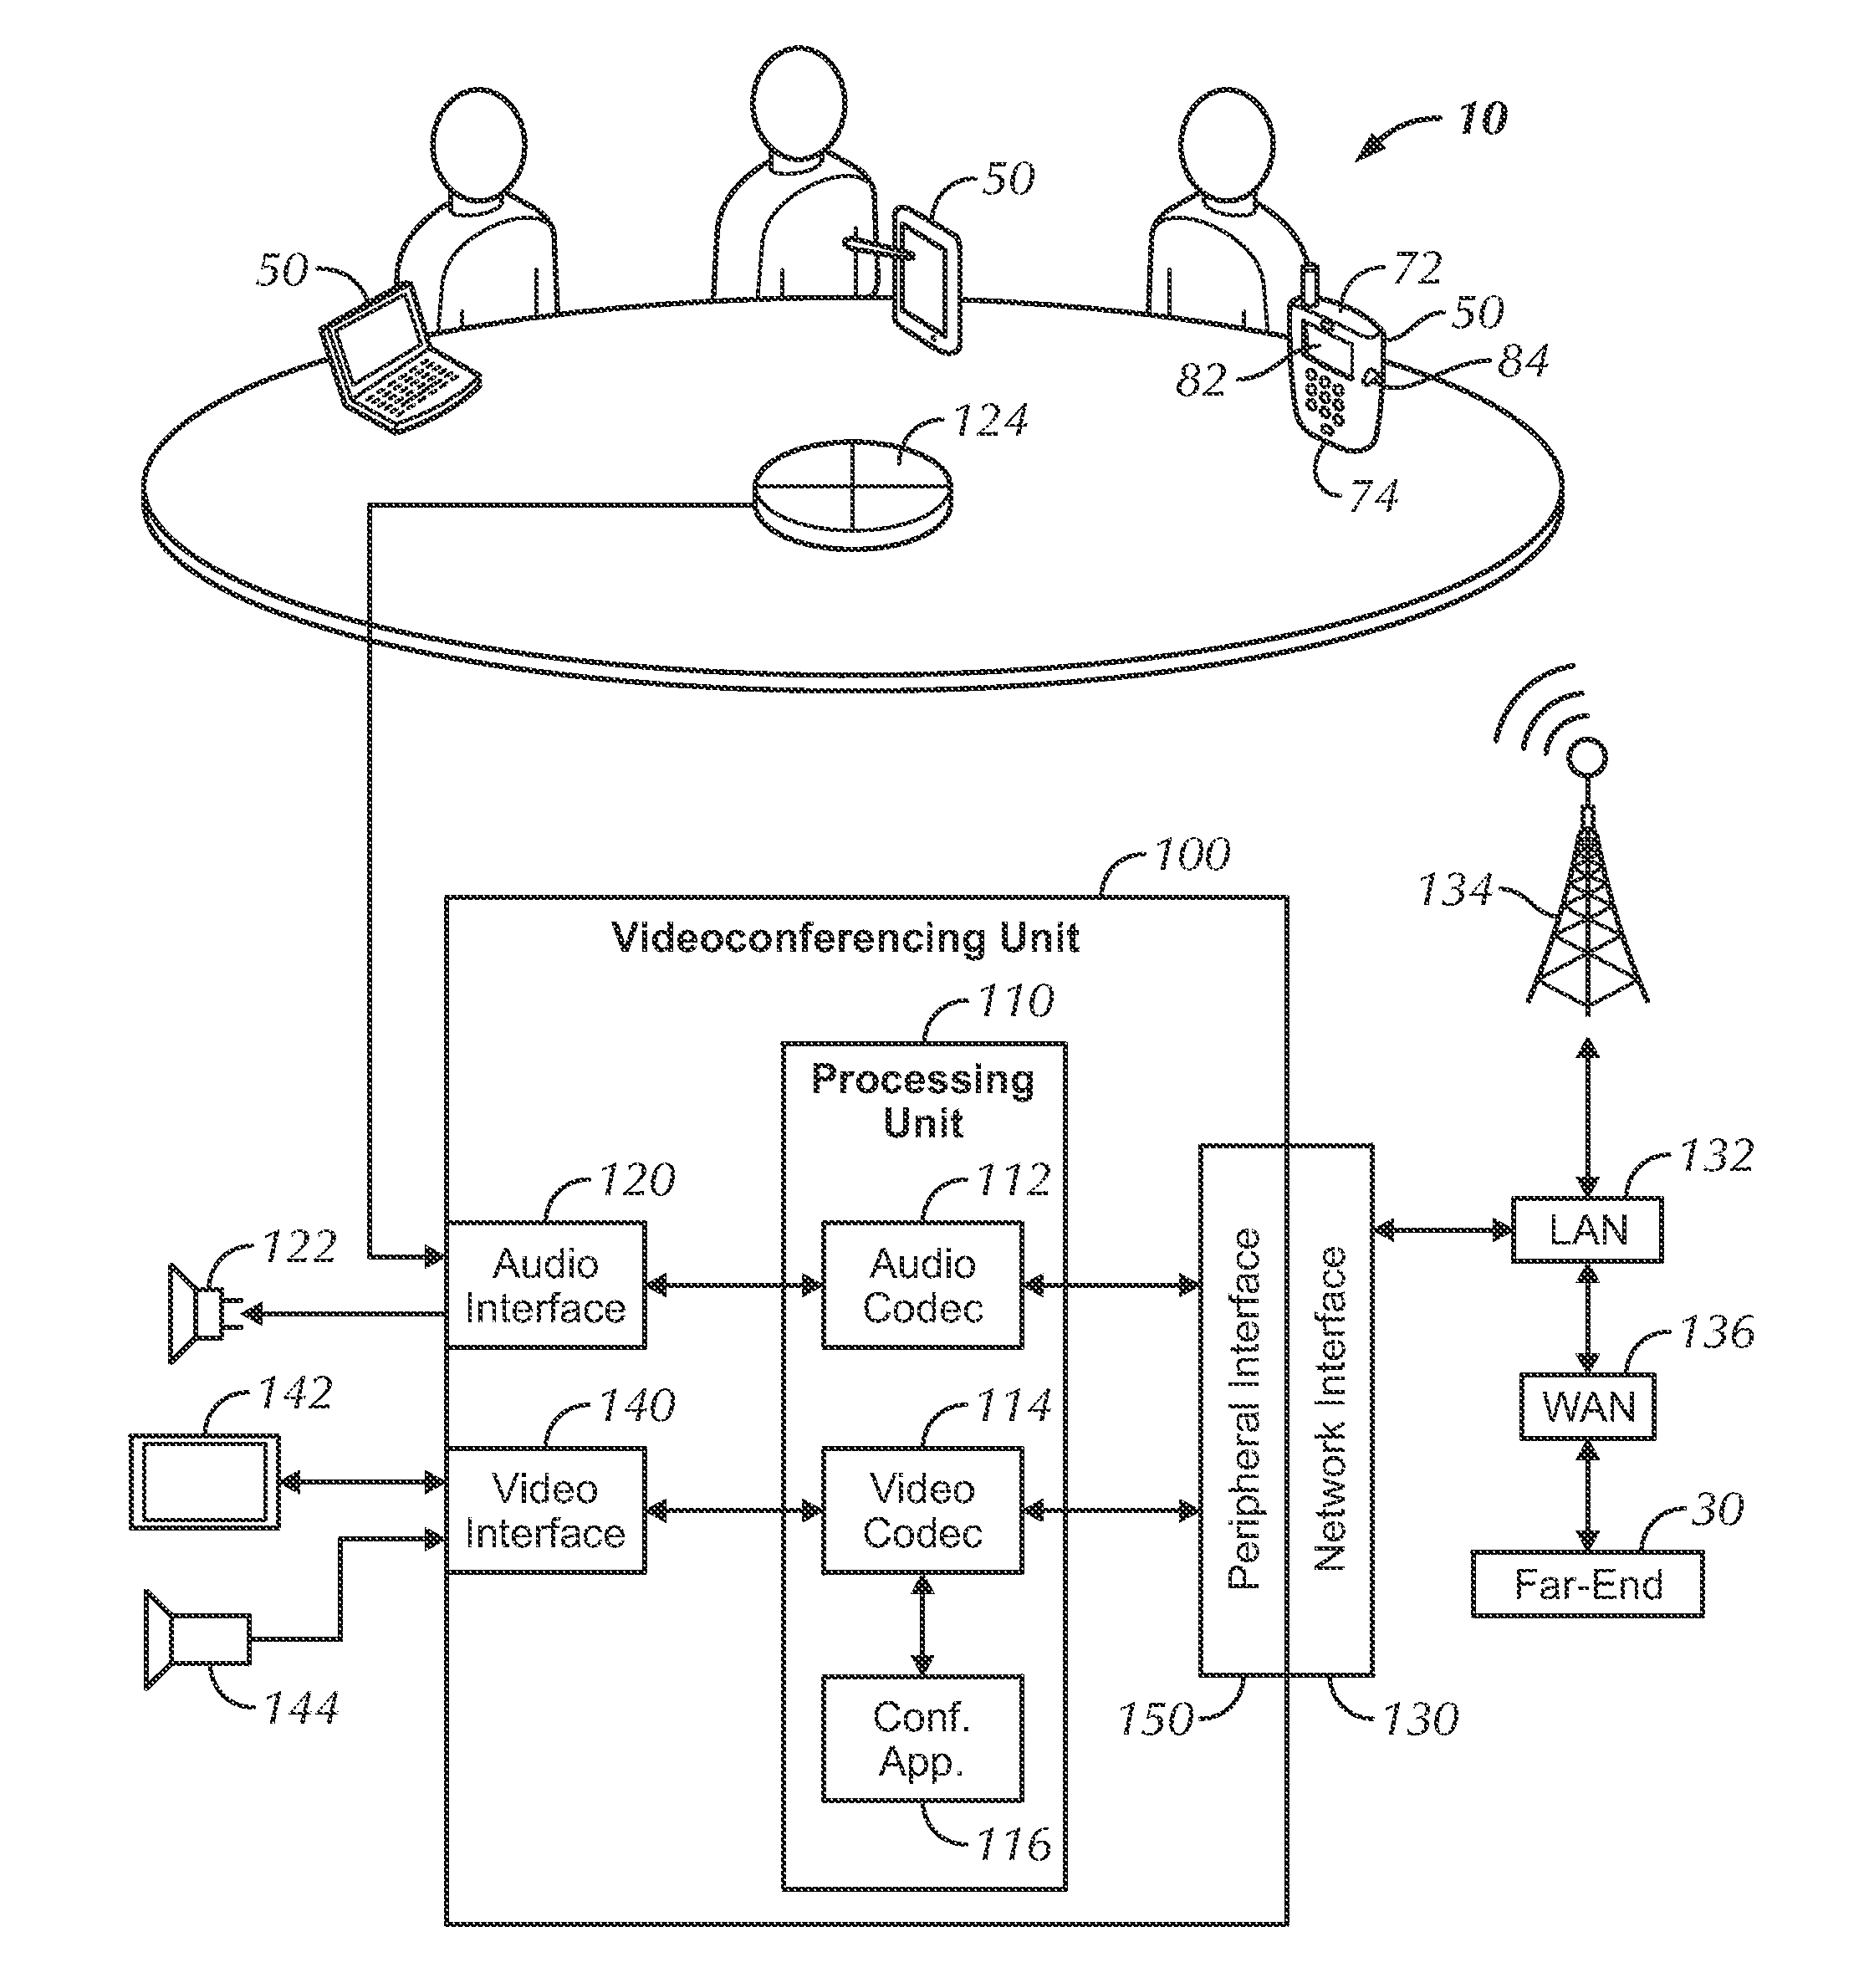 Pairing Devices in Conference Using Ultrasonic Beacon